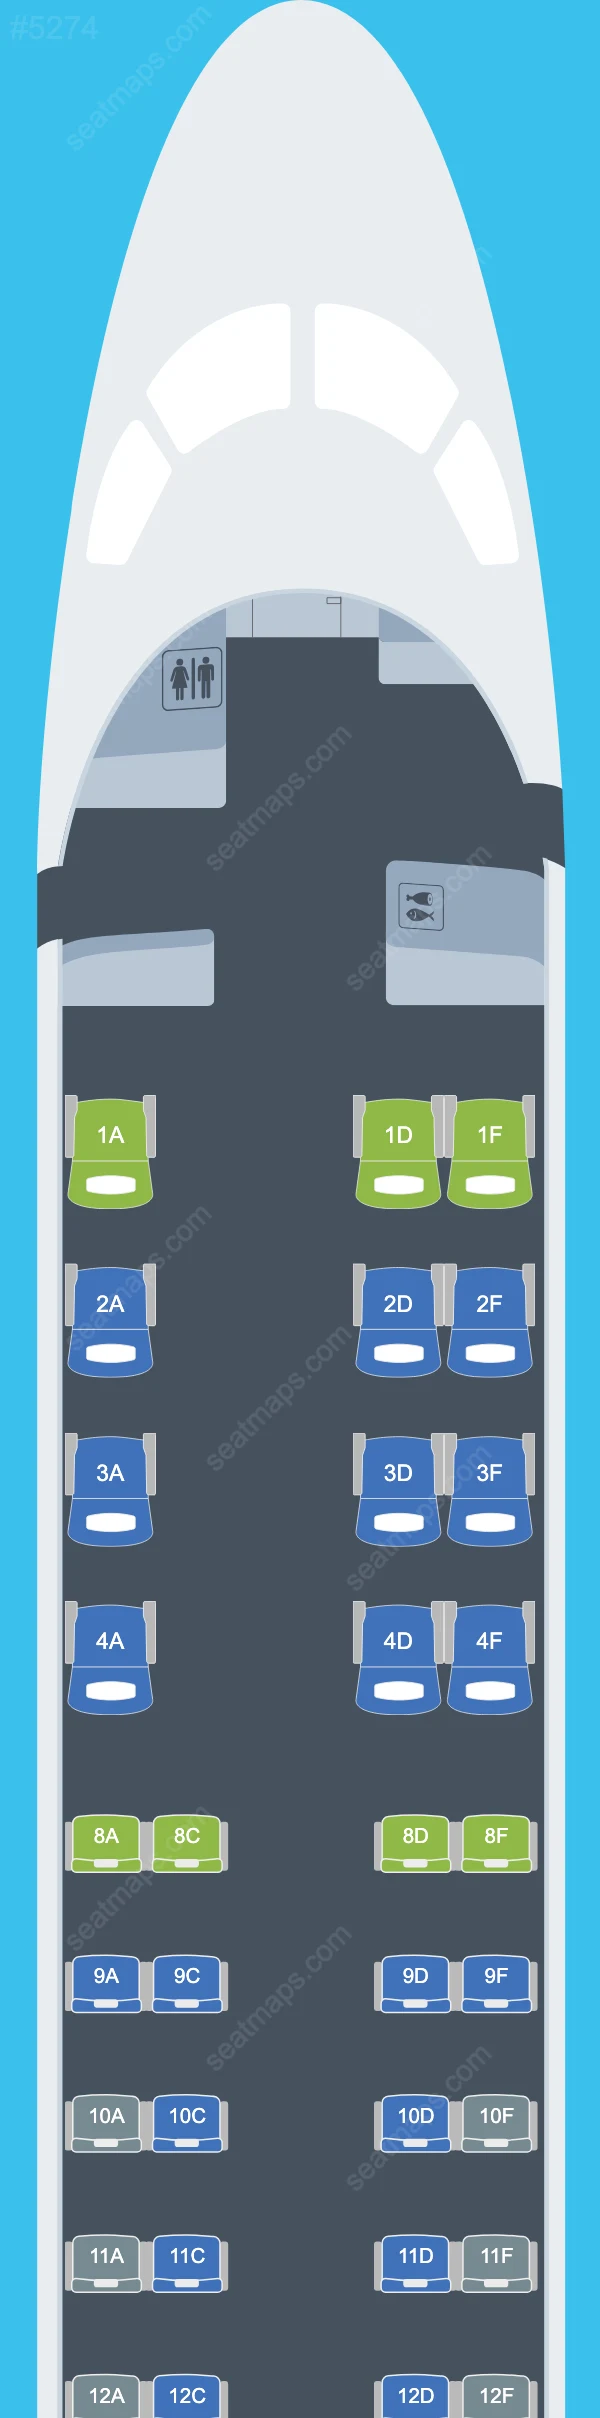 American Airlines Embraer E175 seatmap preview